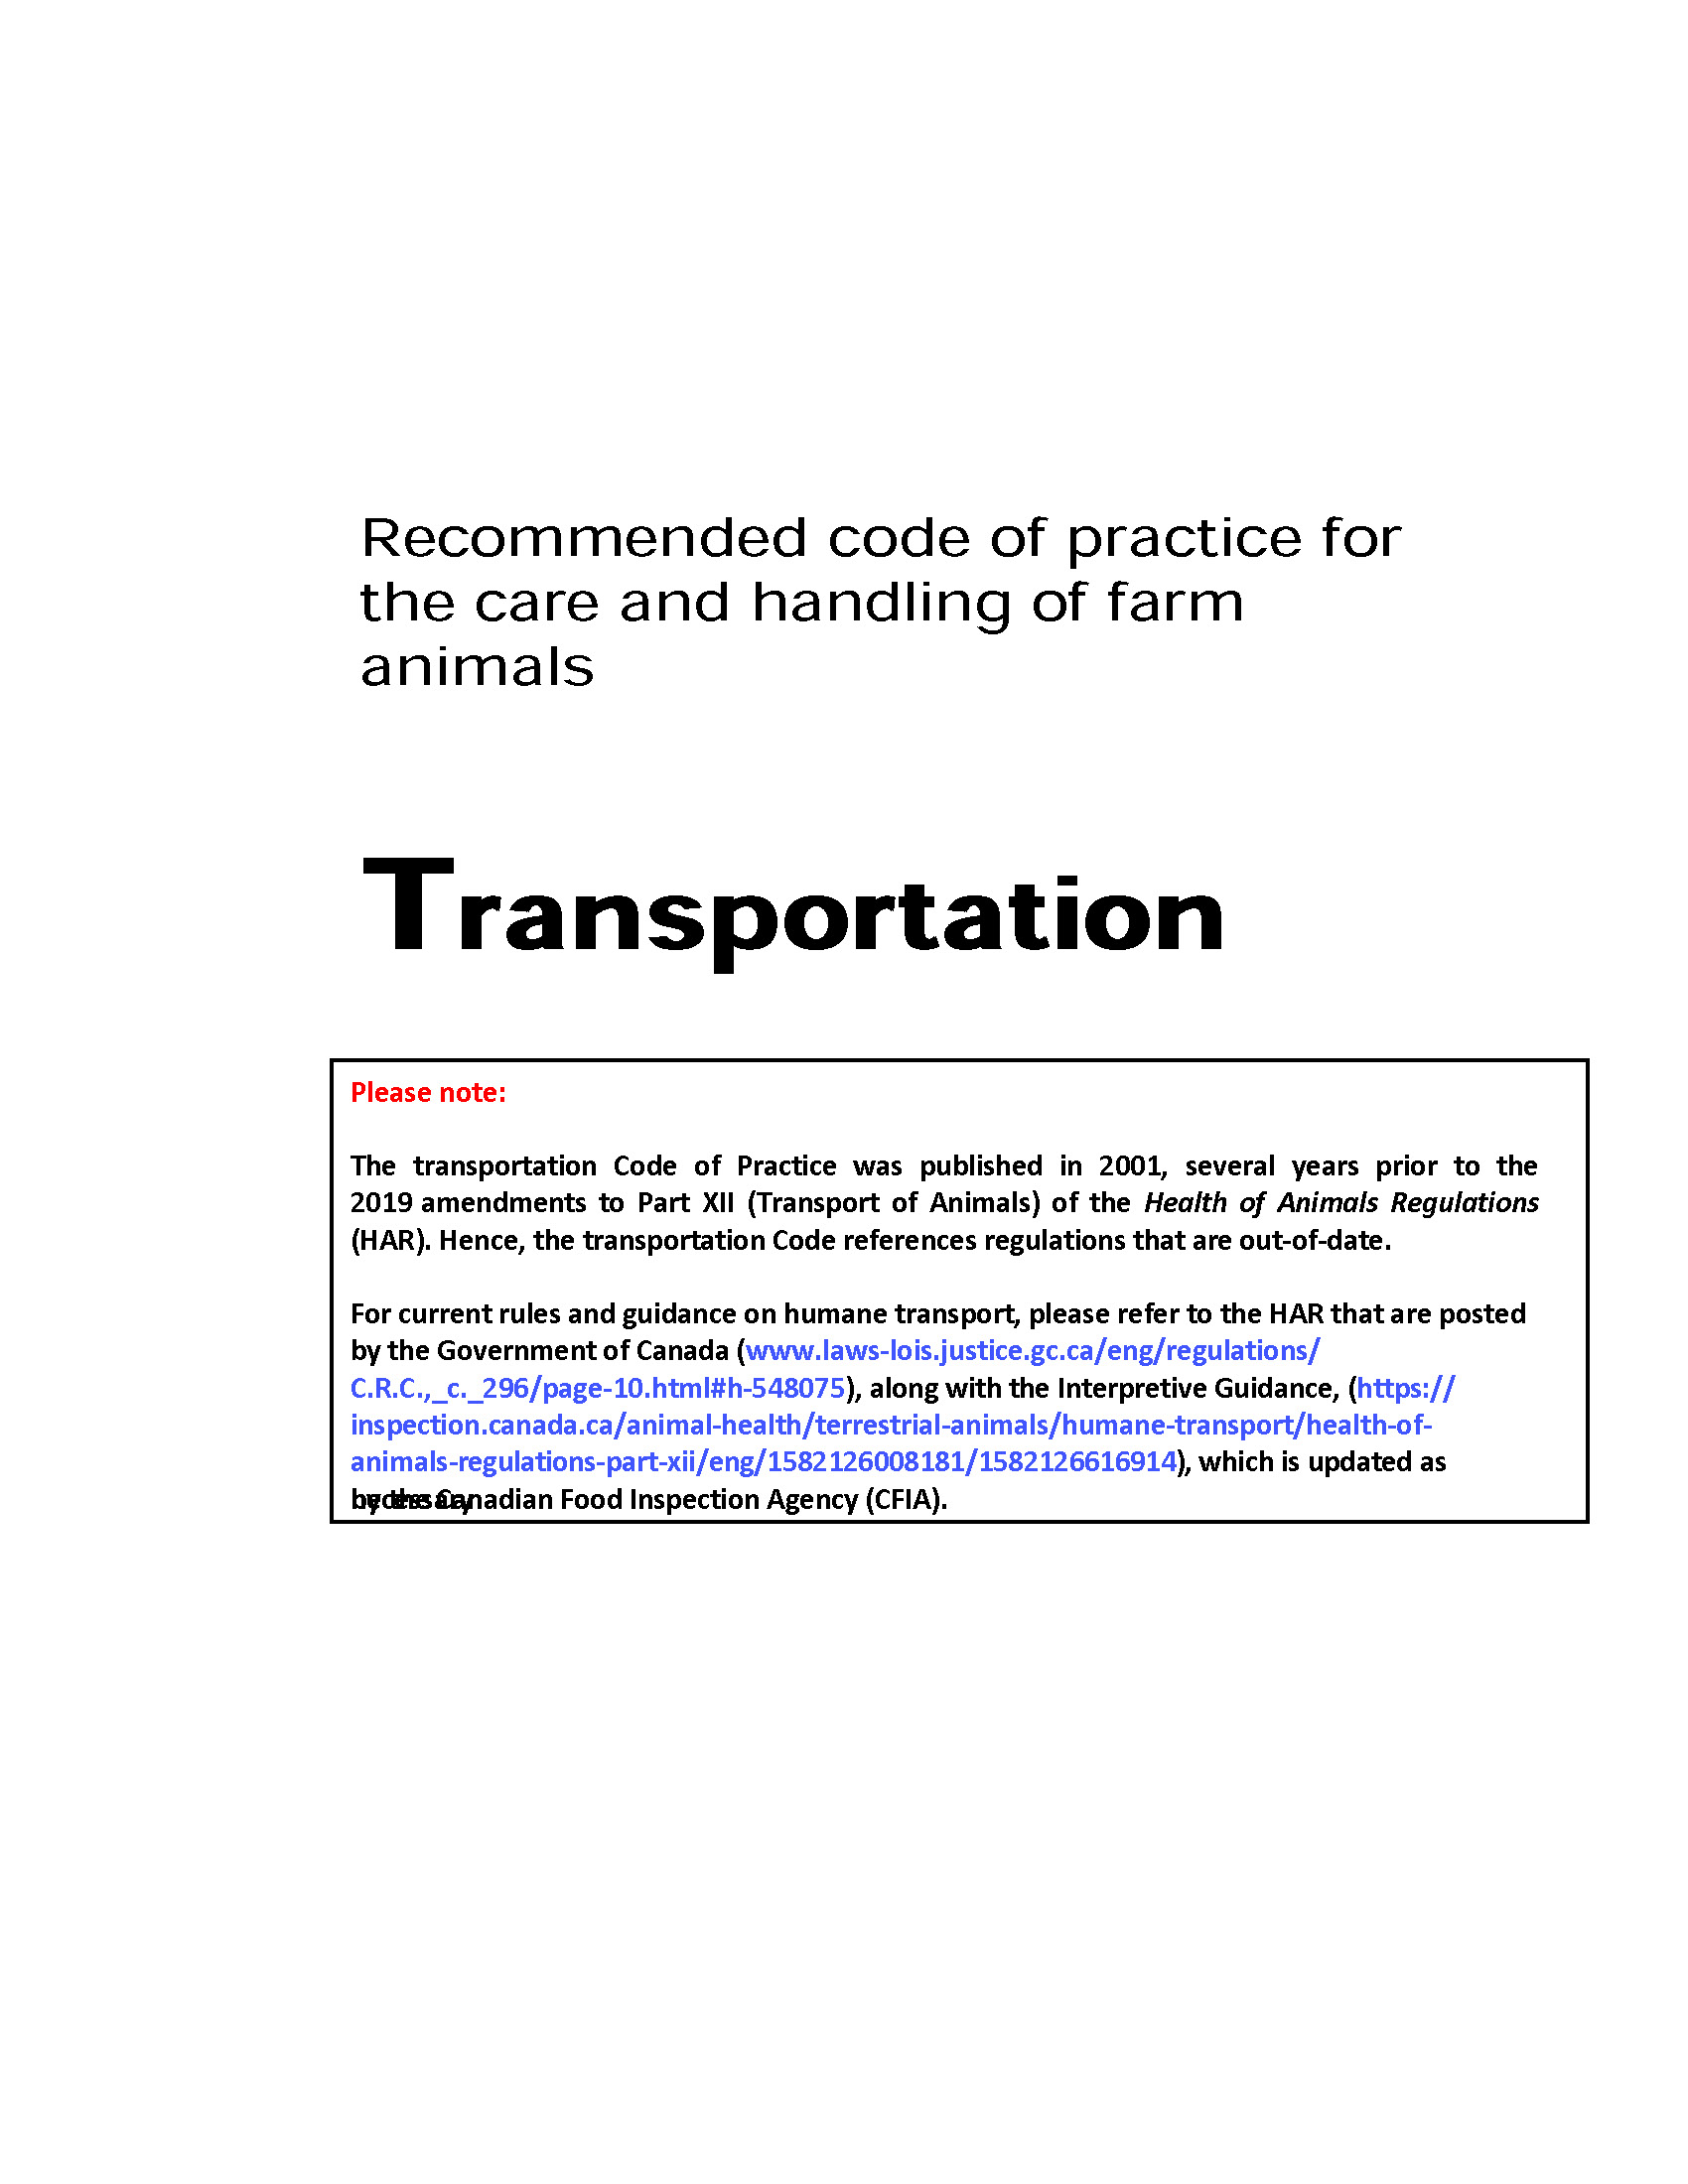 Codes of Practice for the care and handling of farm animals - transportation